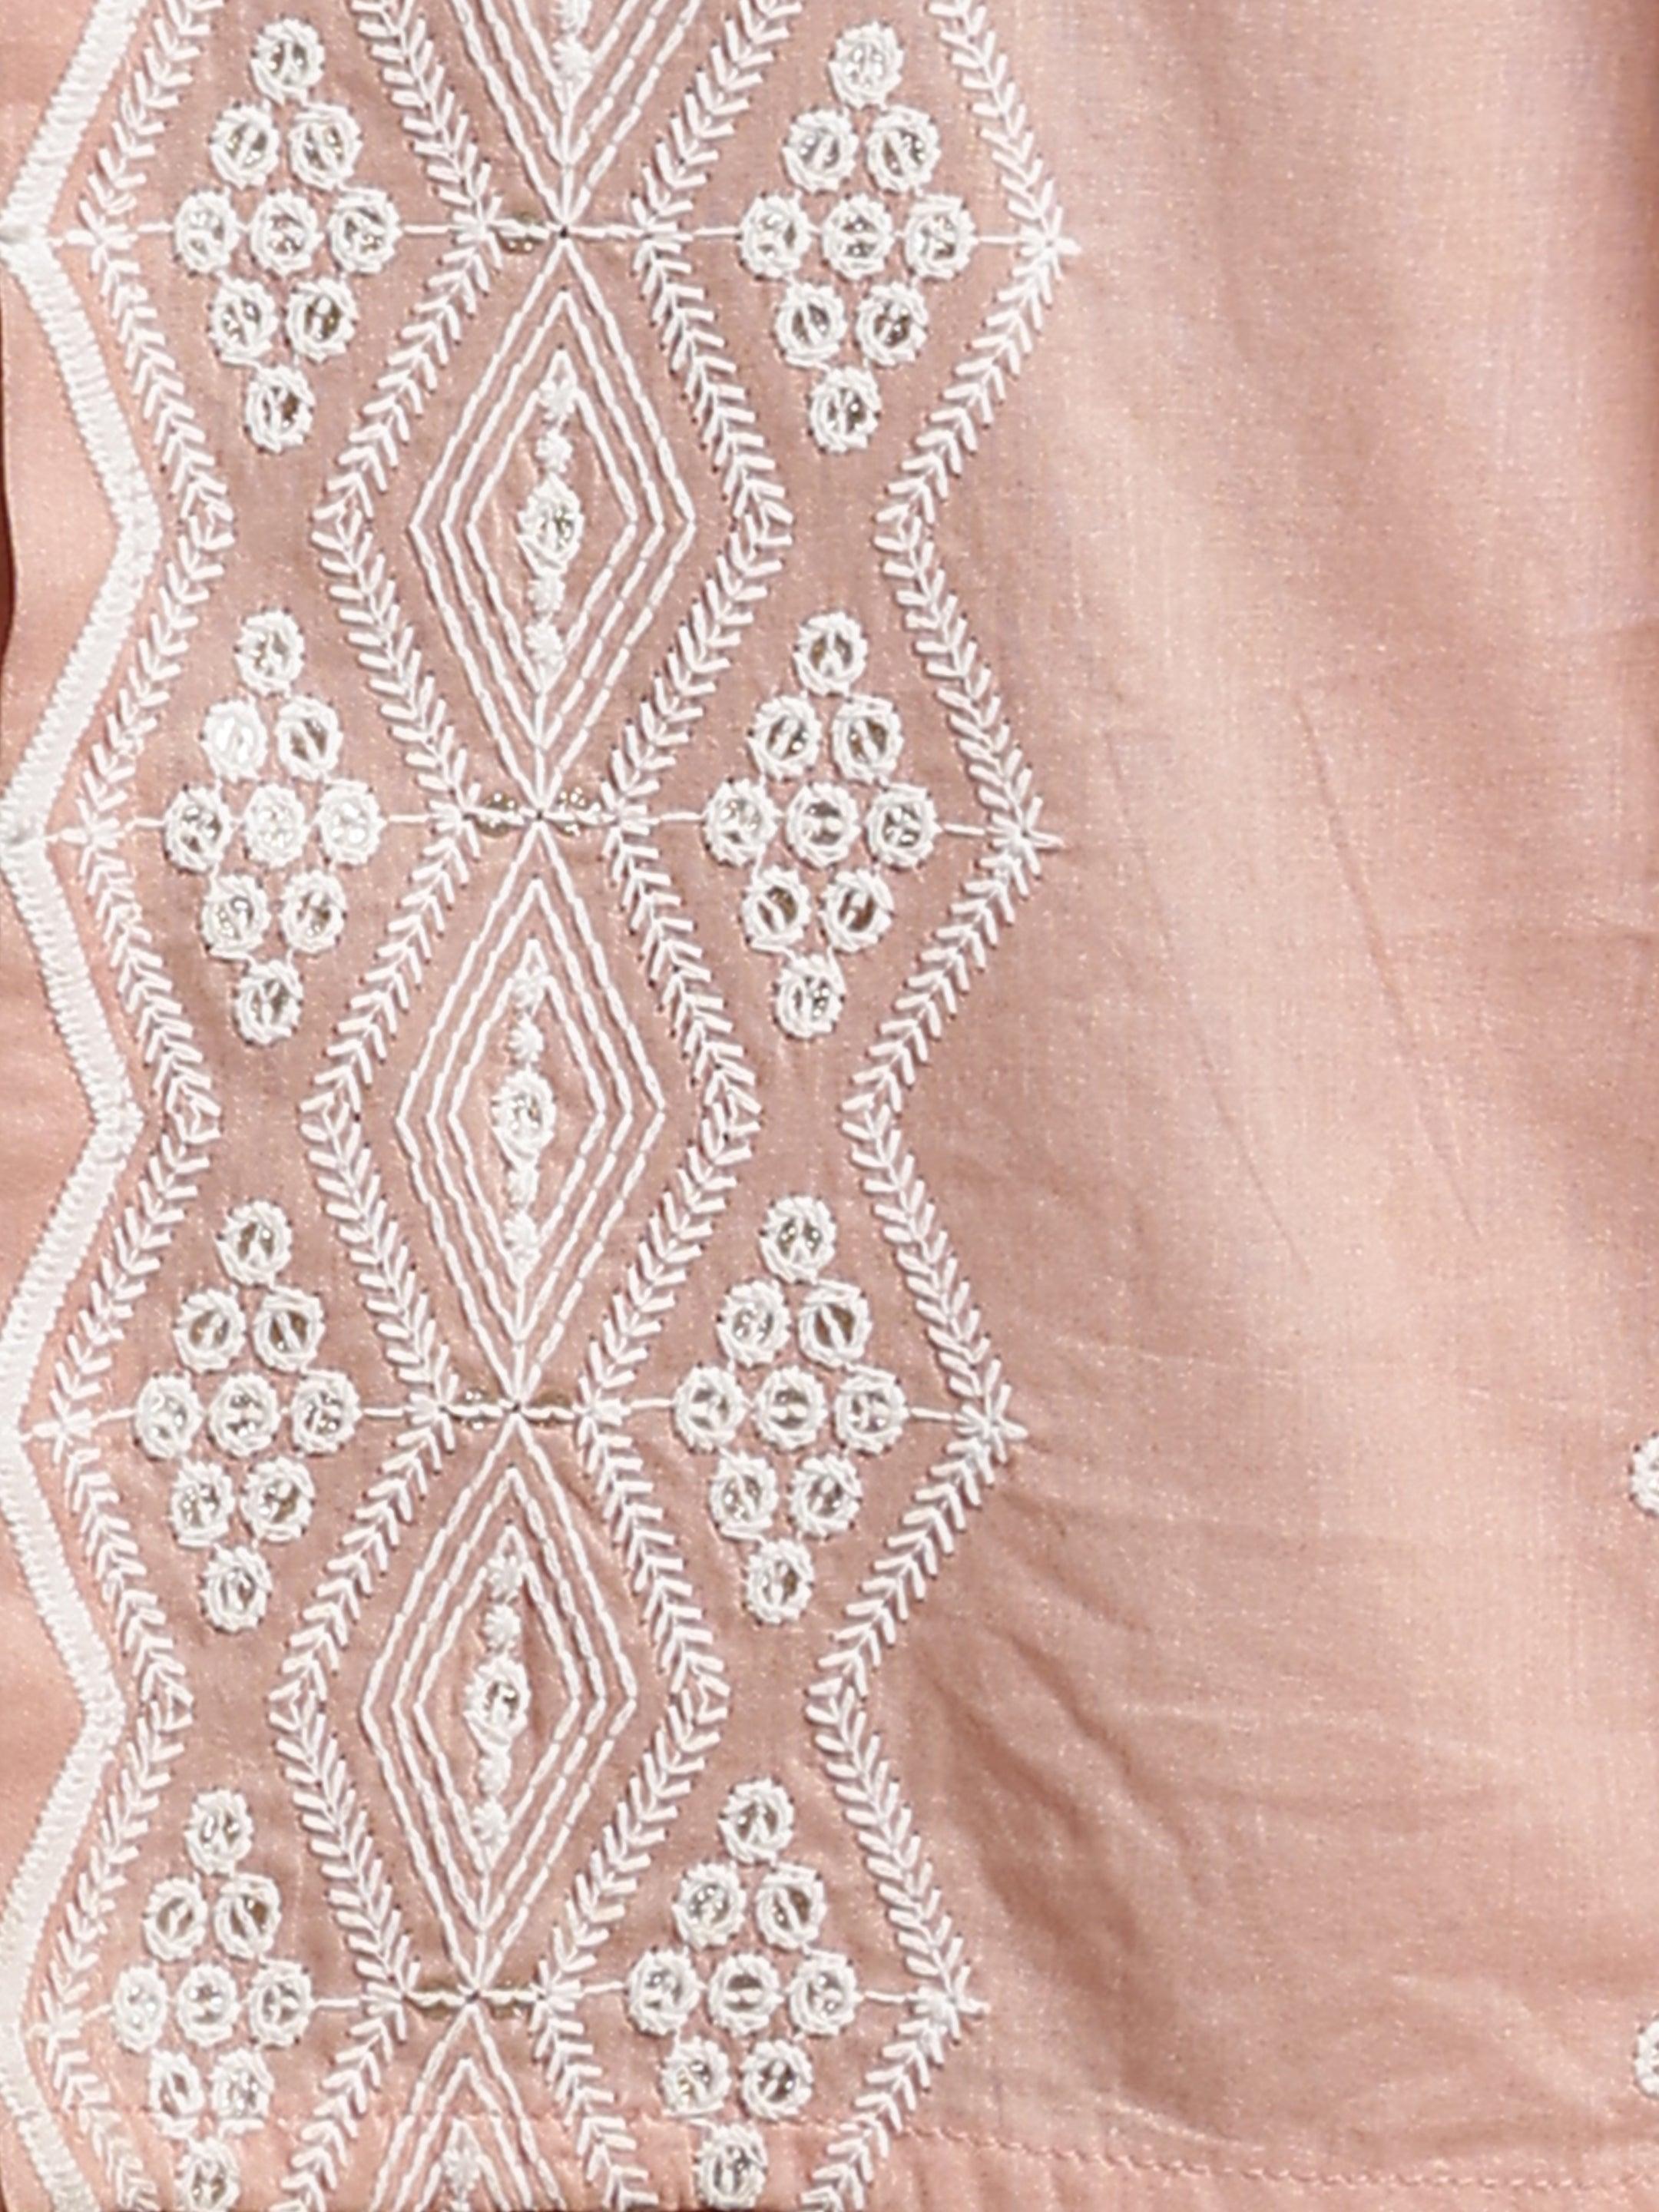 Peach Embroidered Cotton Straight Suit With Dupatta